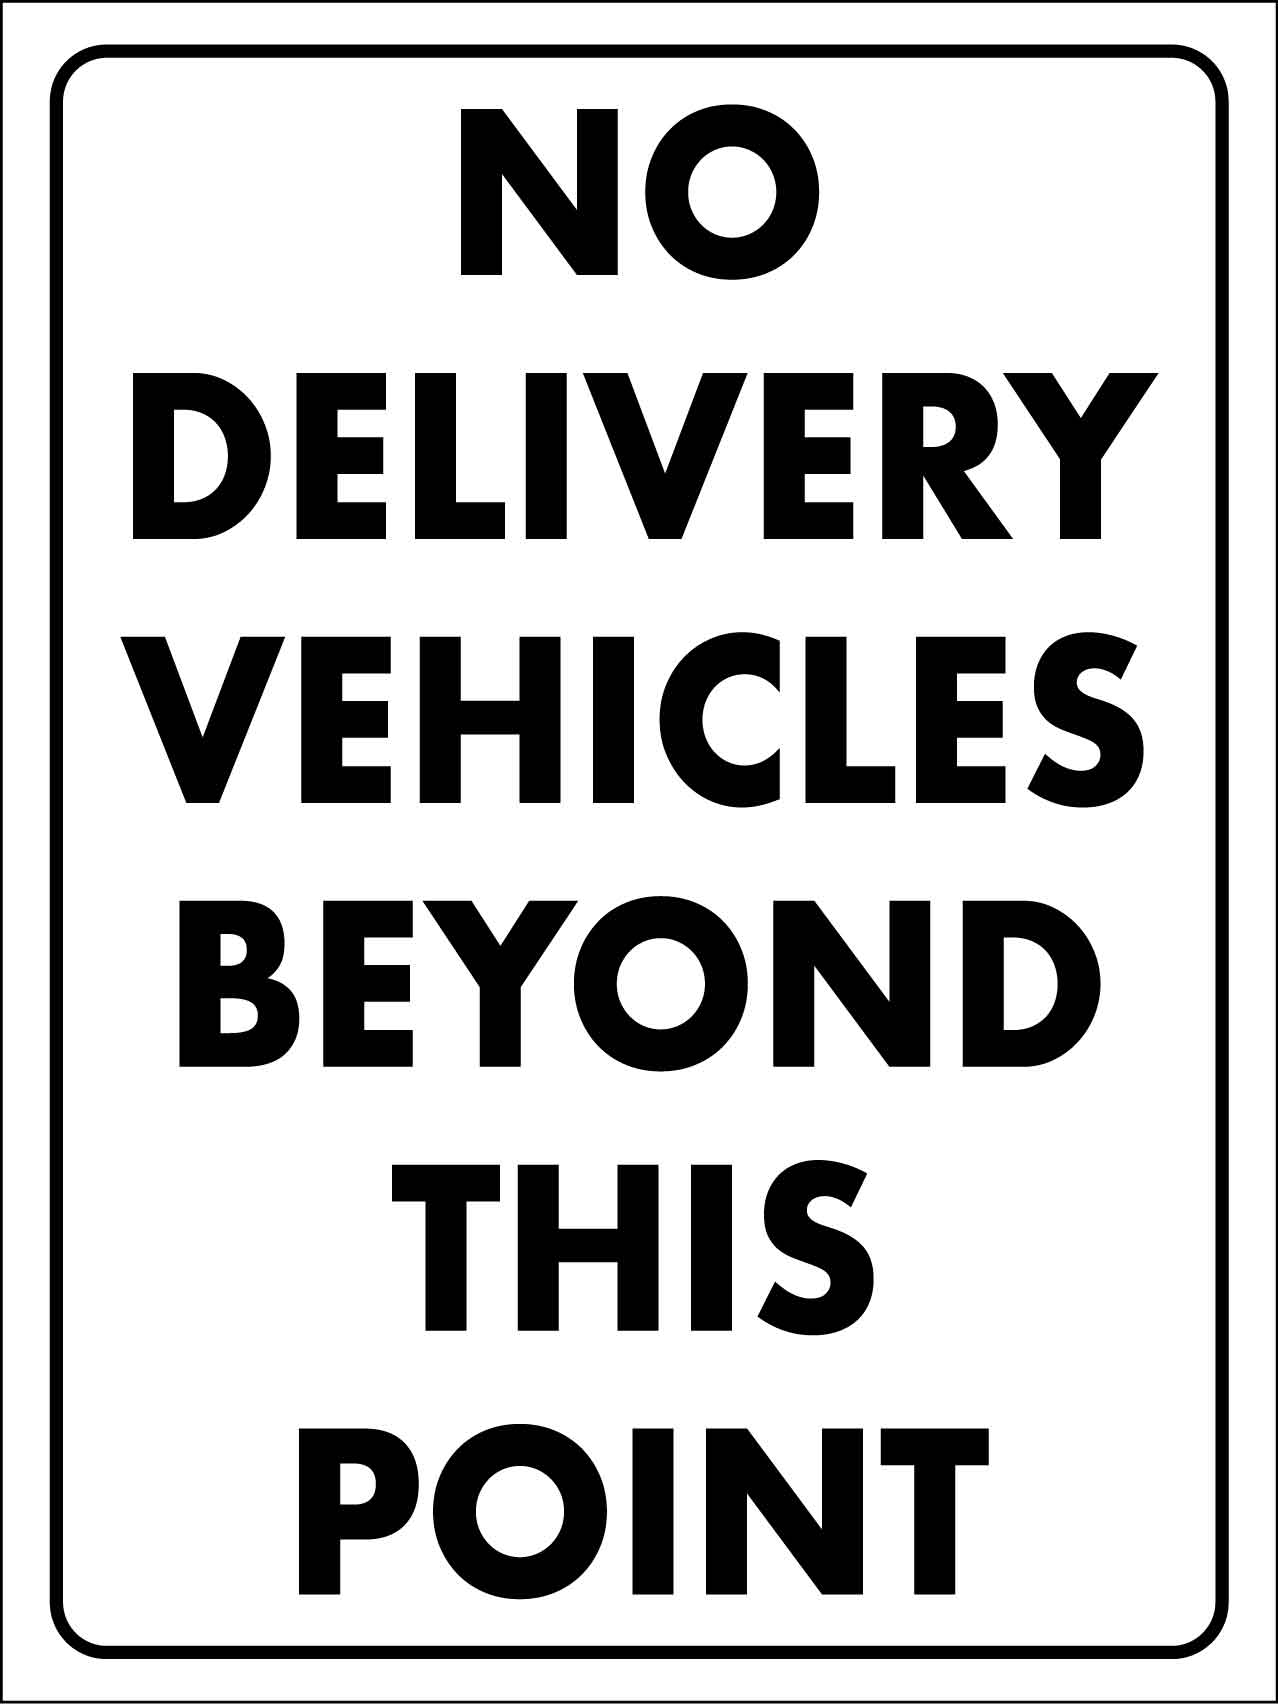 No Delivery Vehicles Beyond This Point Sign